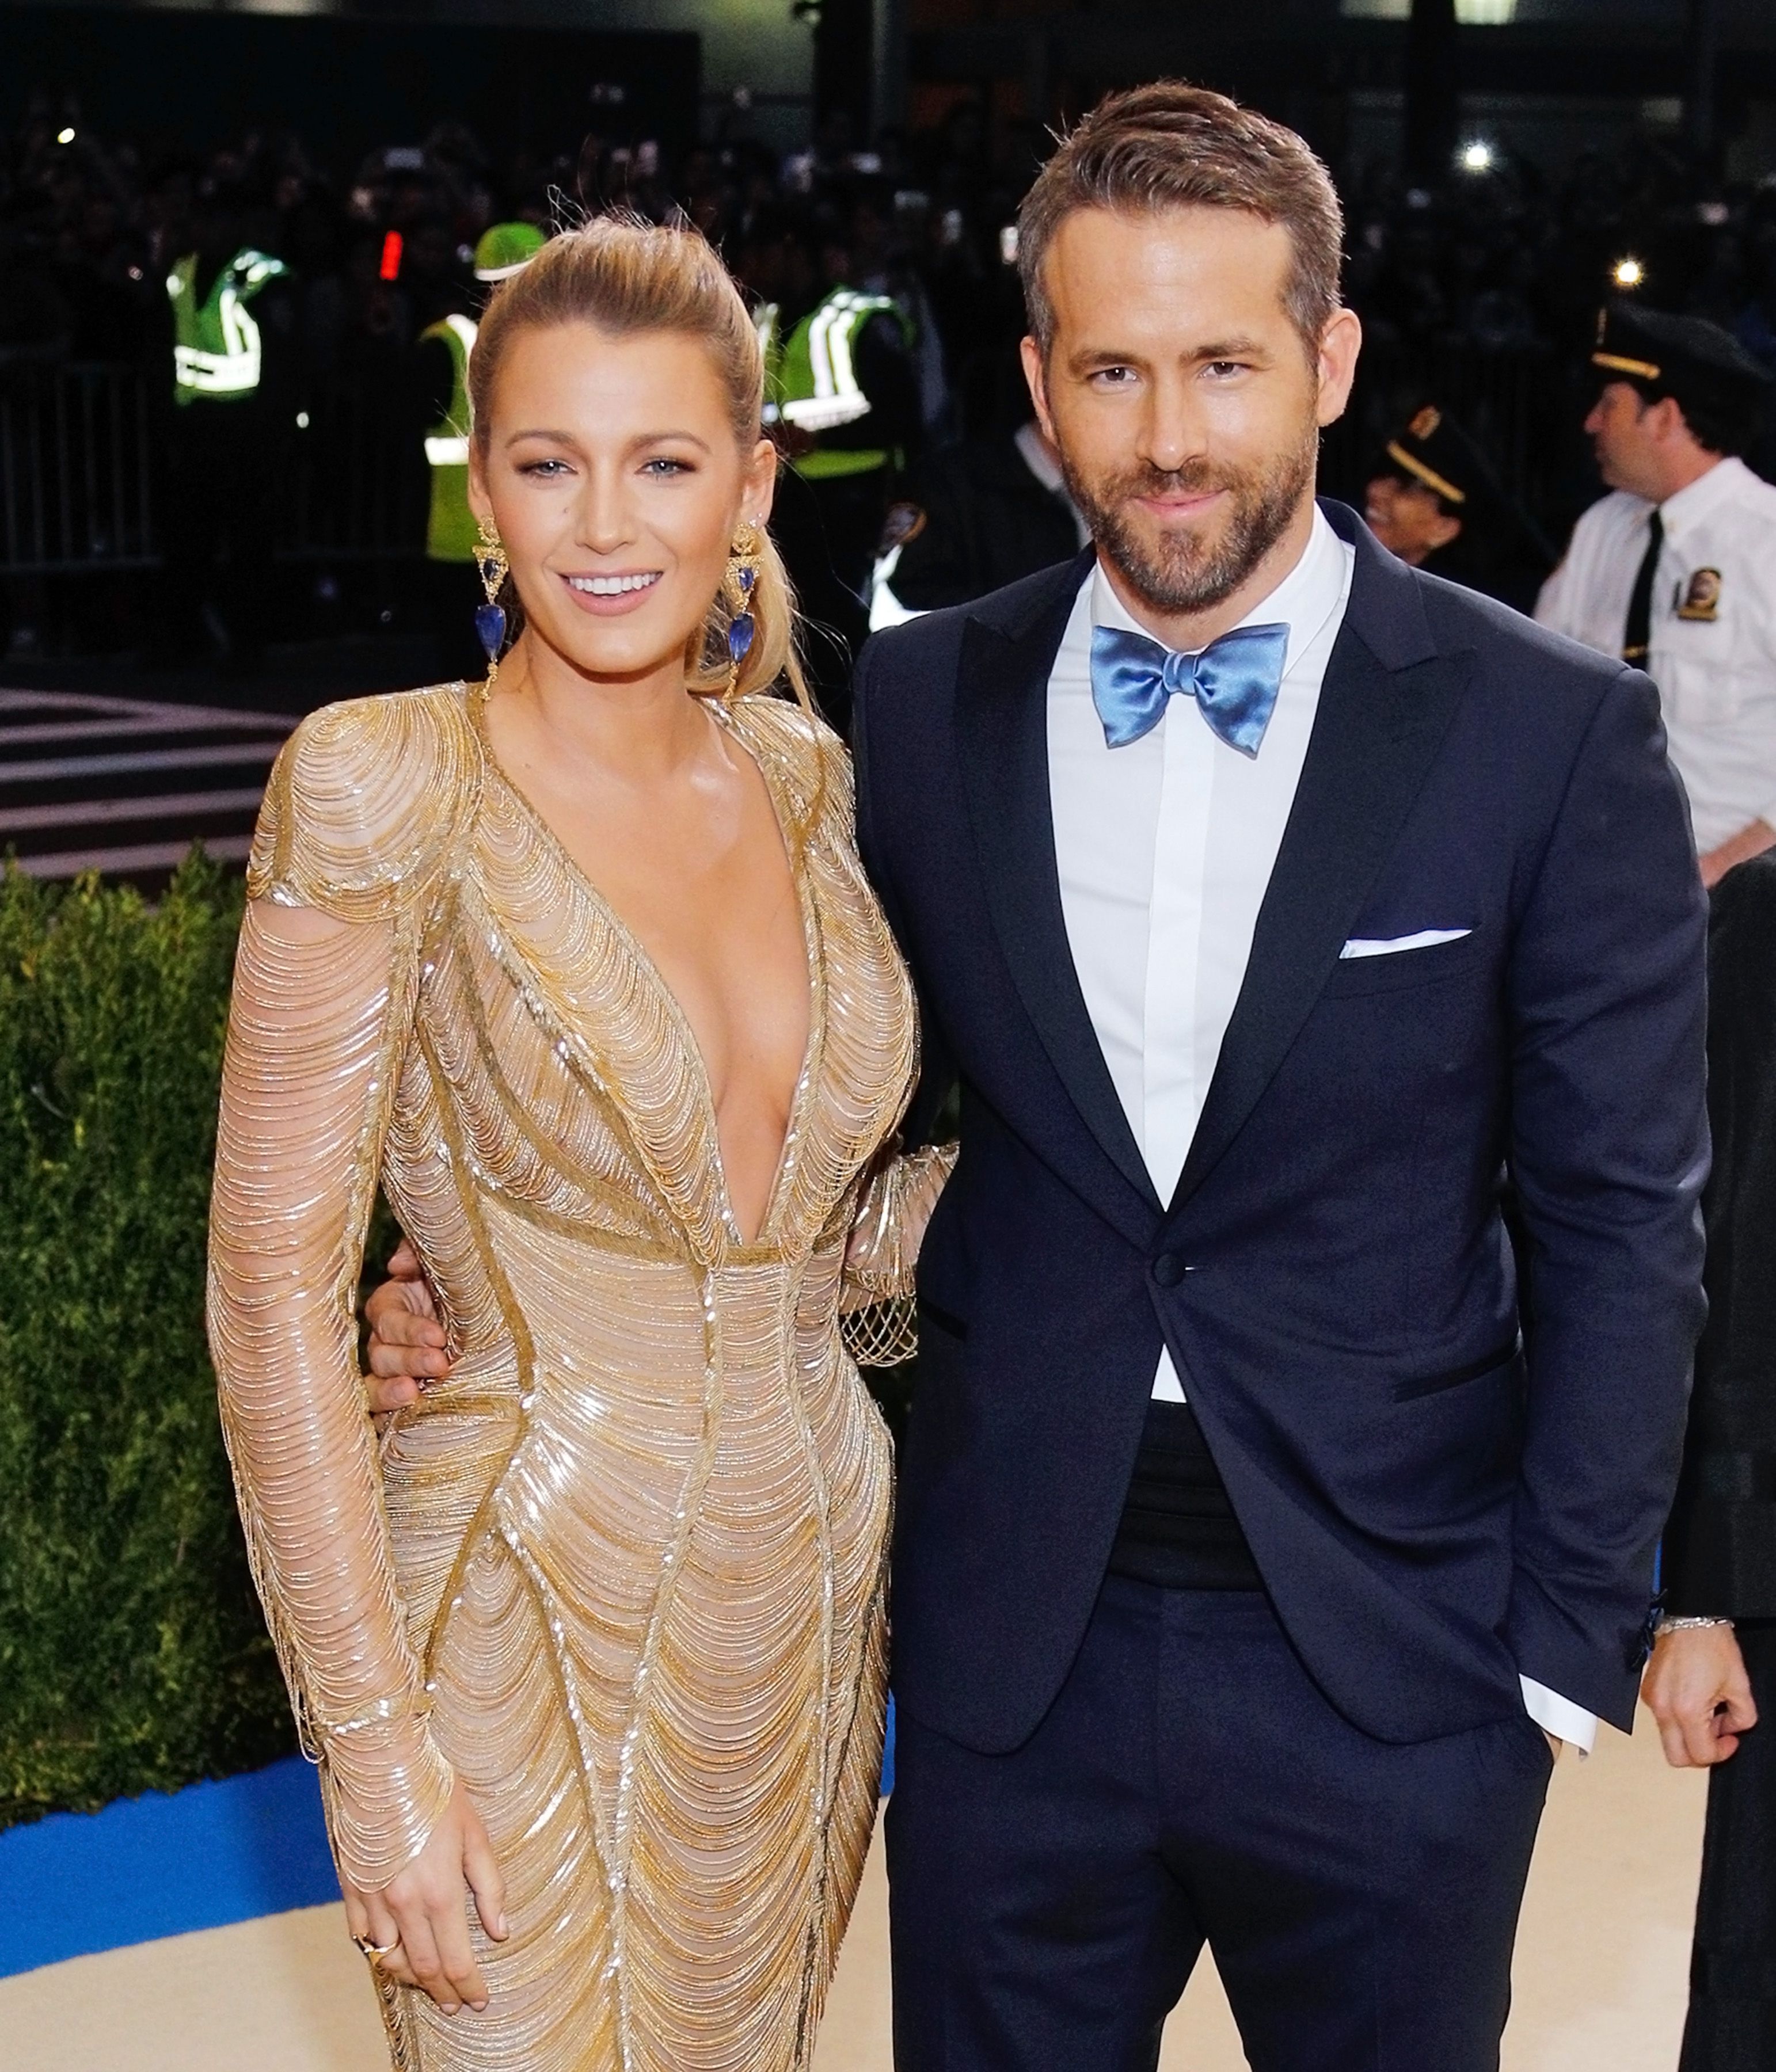 Blake Lively Shared A Very Horny 